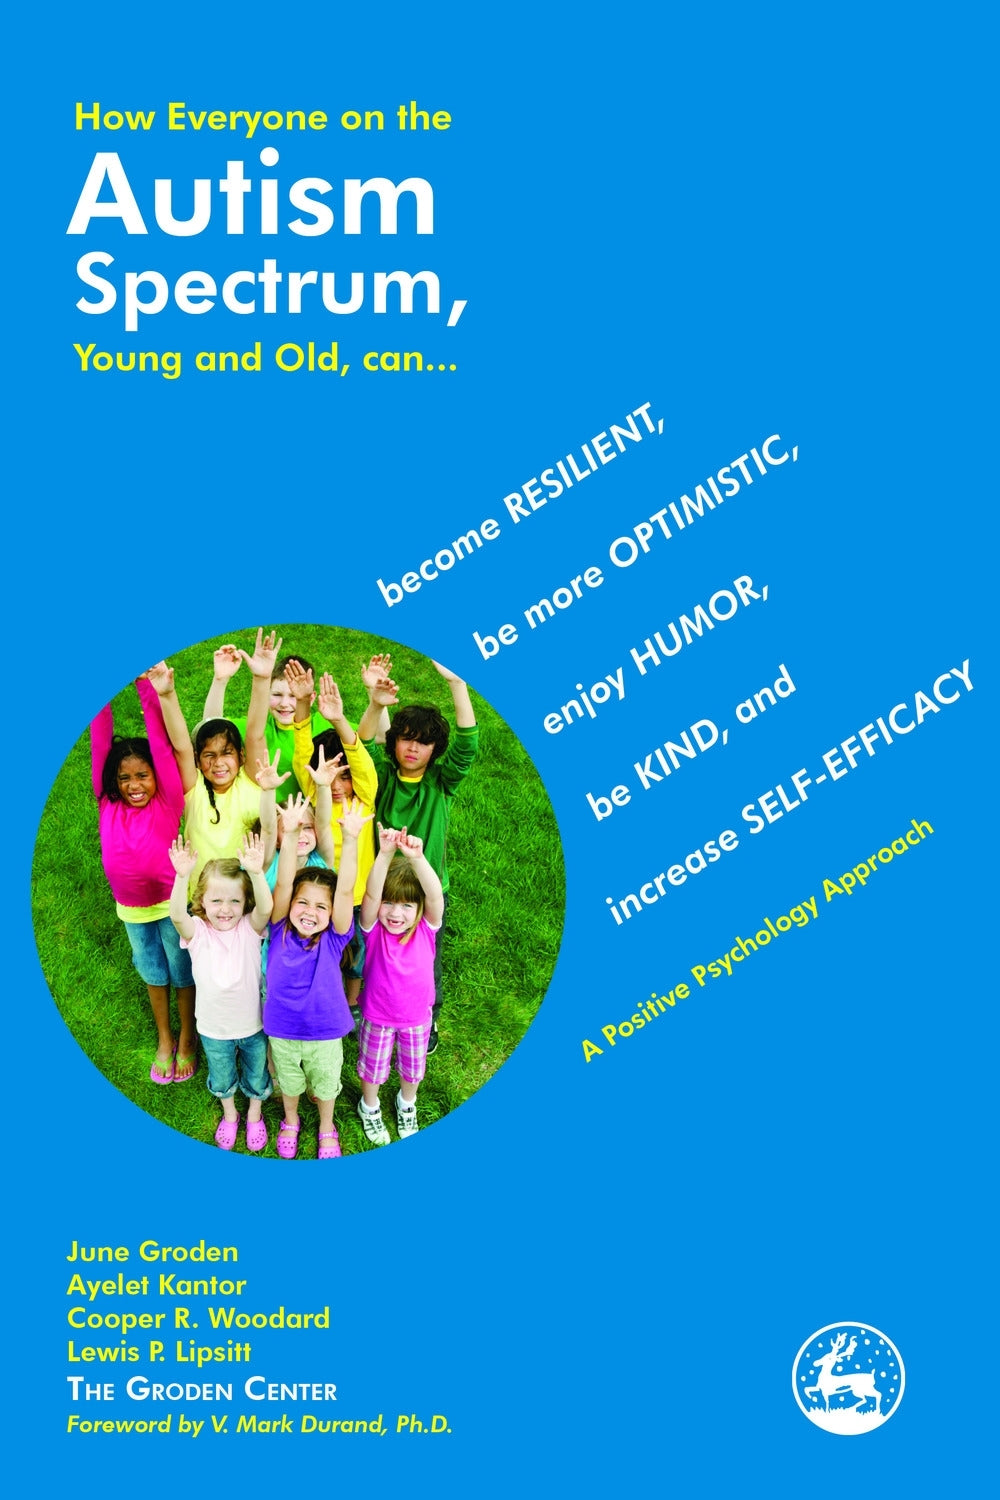 How Everyone on the Autism Spectrum, Young and Old, can... by June Groden, Ayelet Kantor, Cooper R. Woodard, Lewis Lipsitt